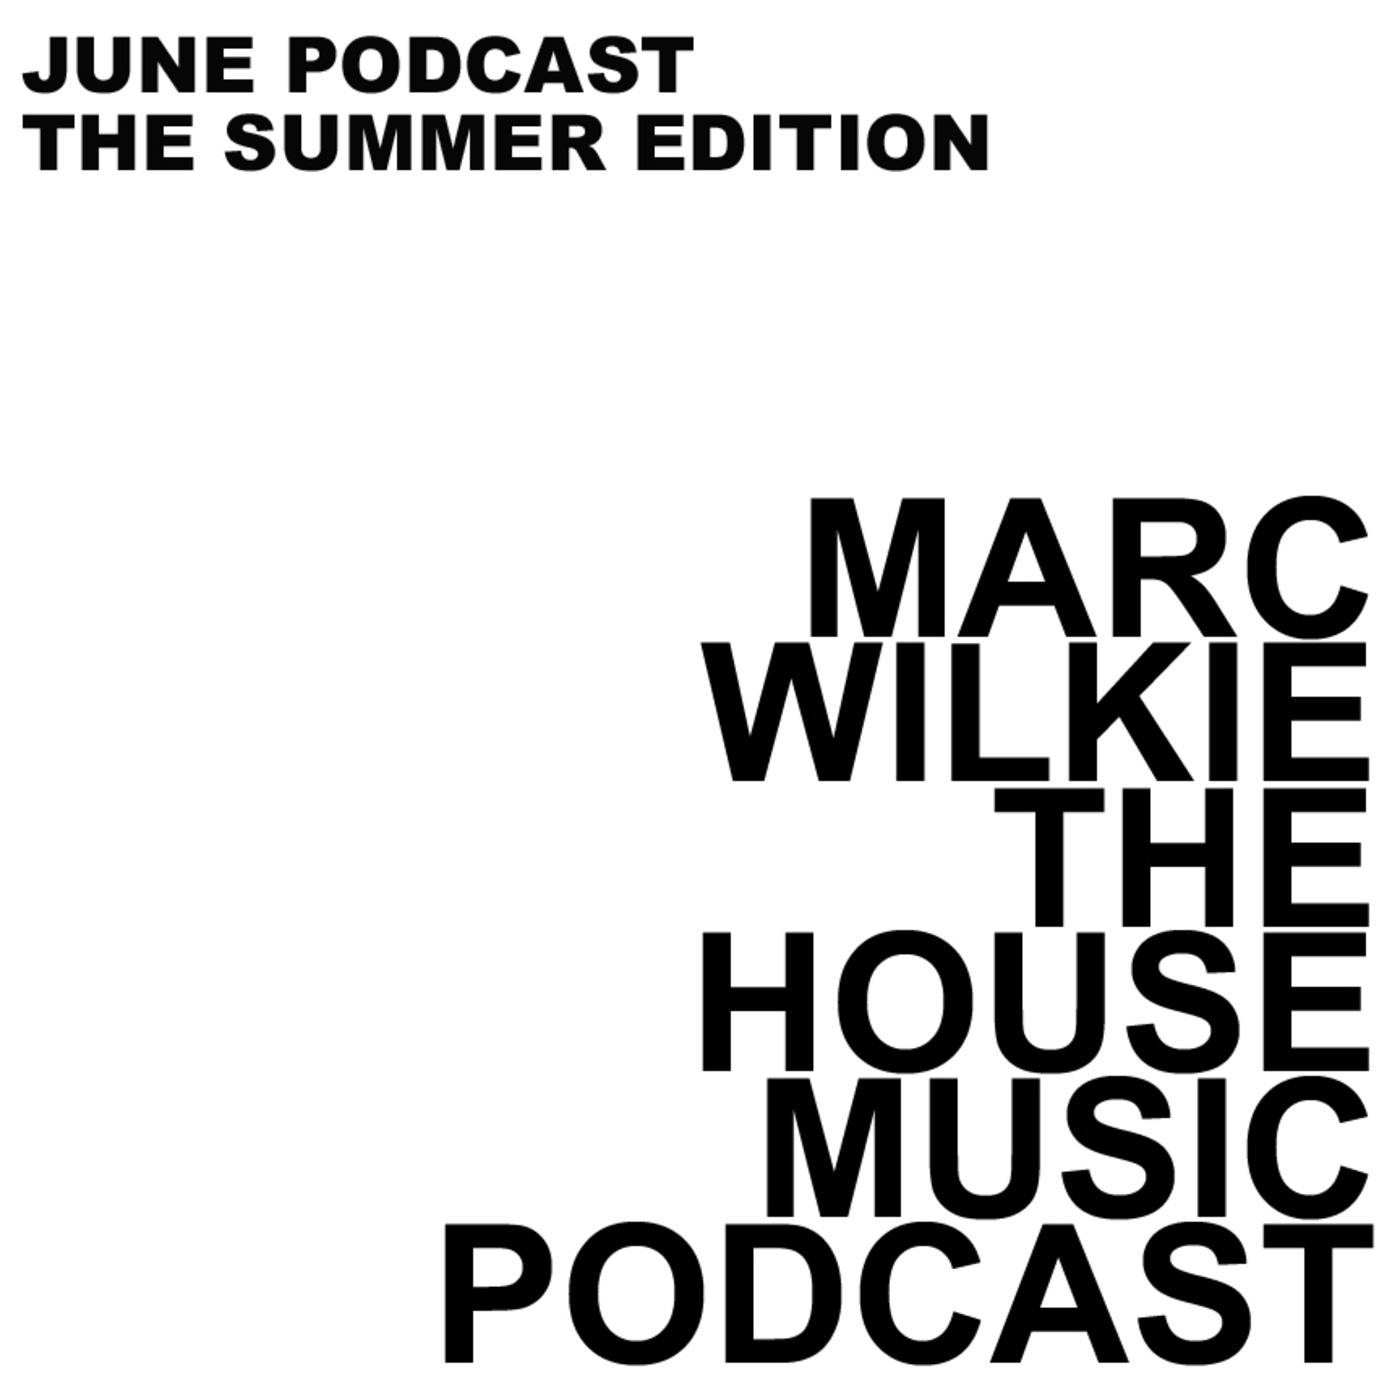 June Podcast 2012 - The summer Edition